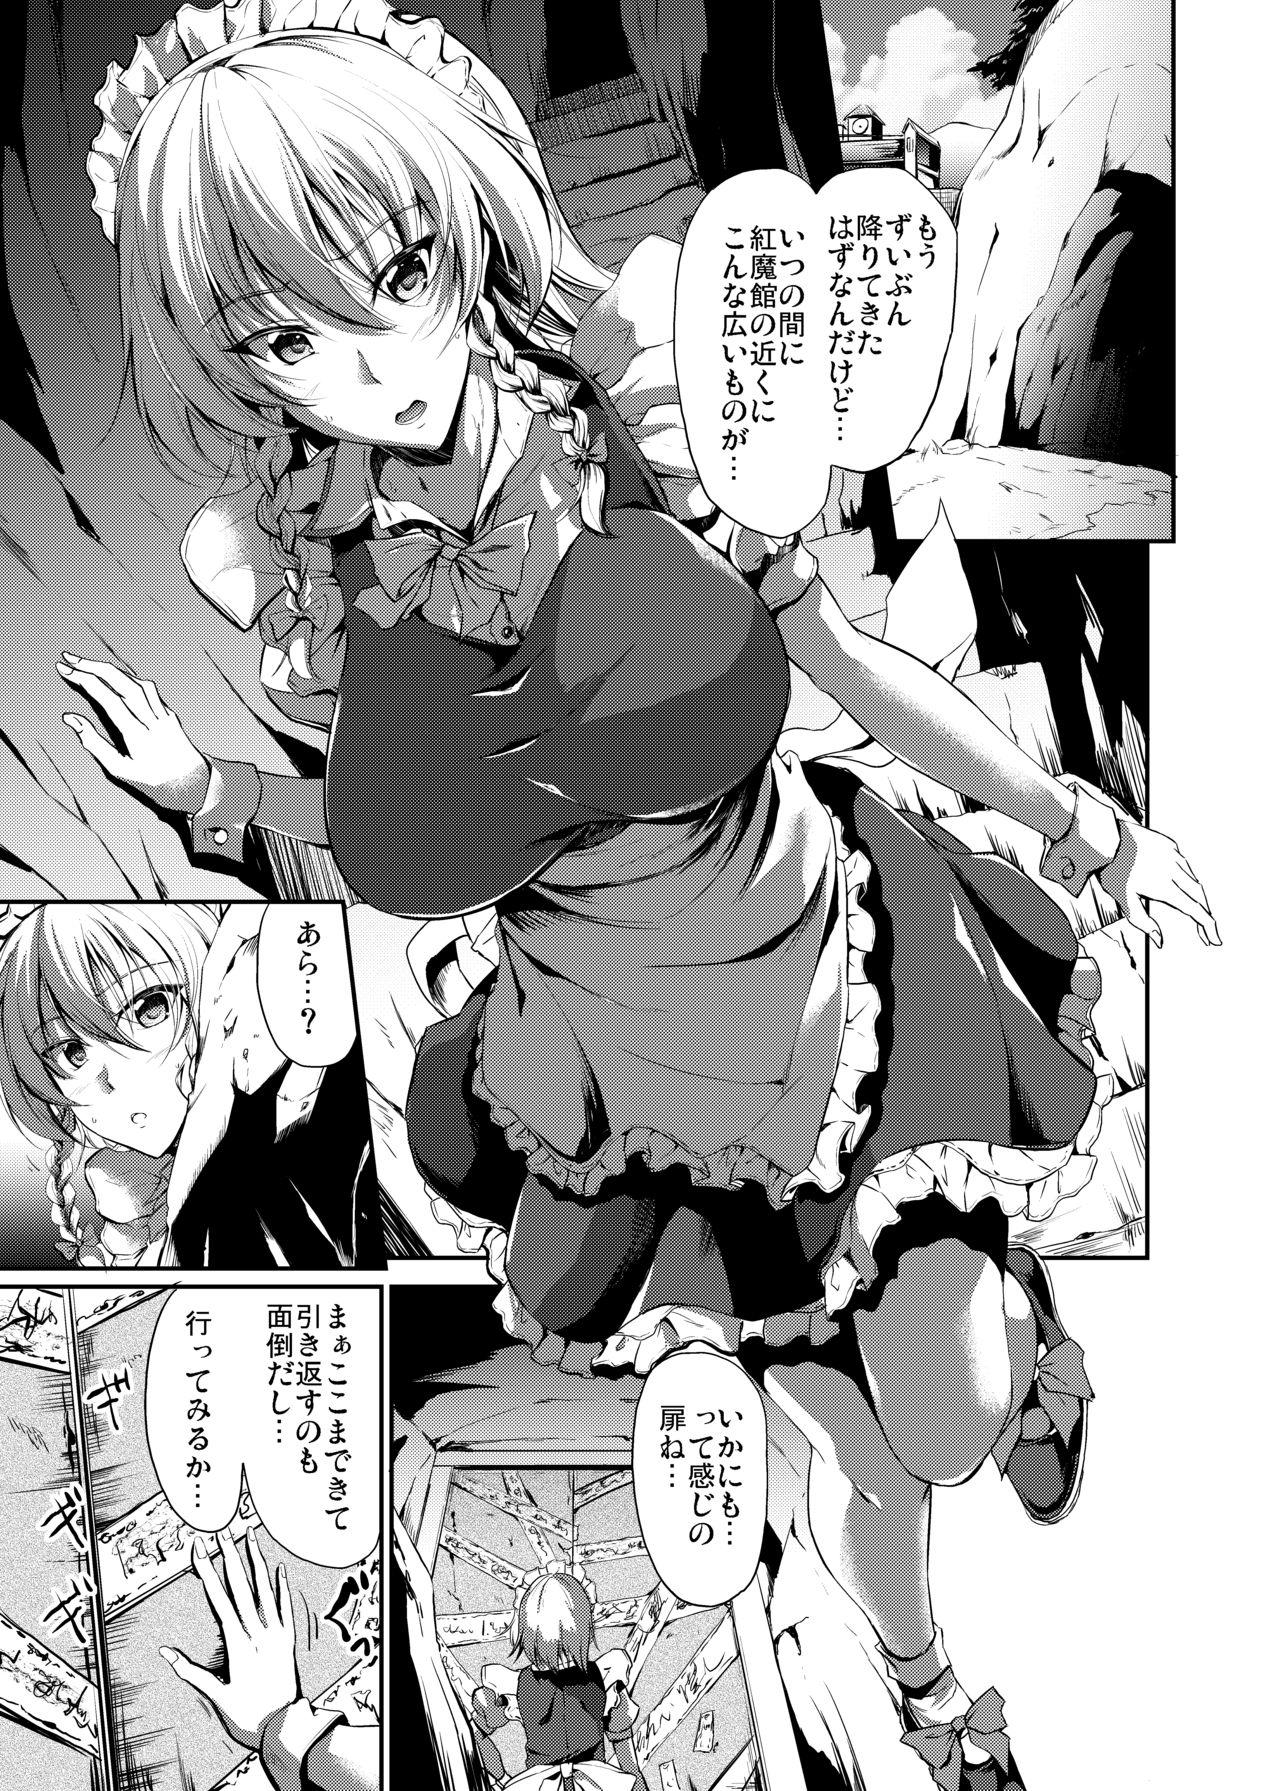 The Ero Trap Dungeon: HELL - Touhou project Uncut - Page 3